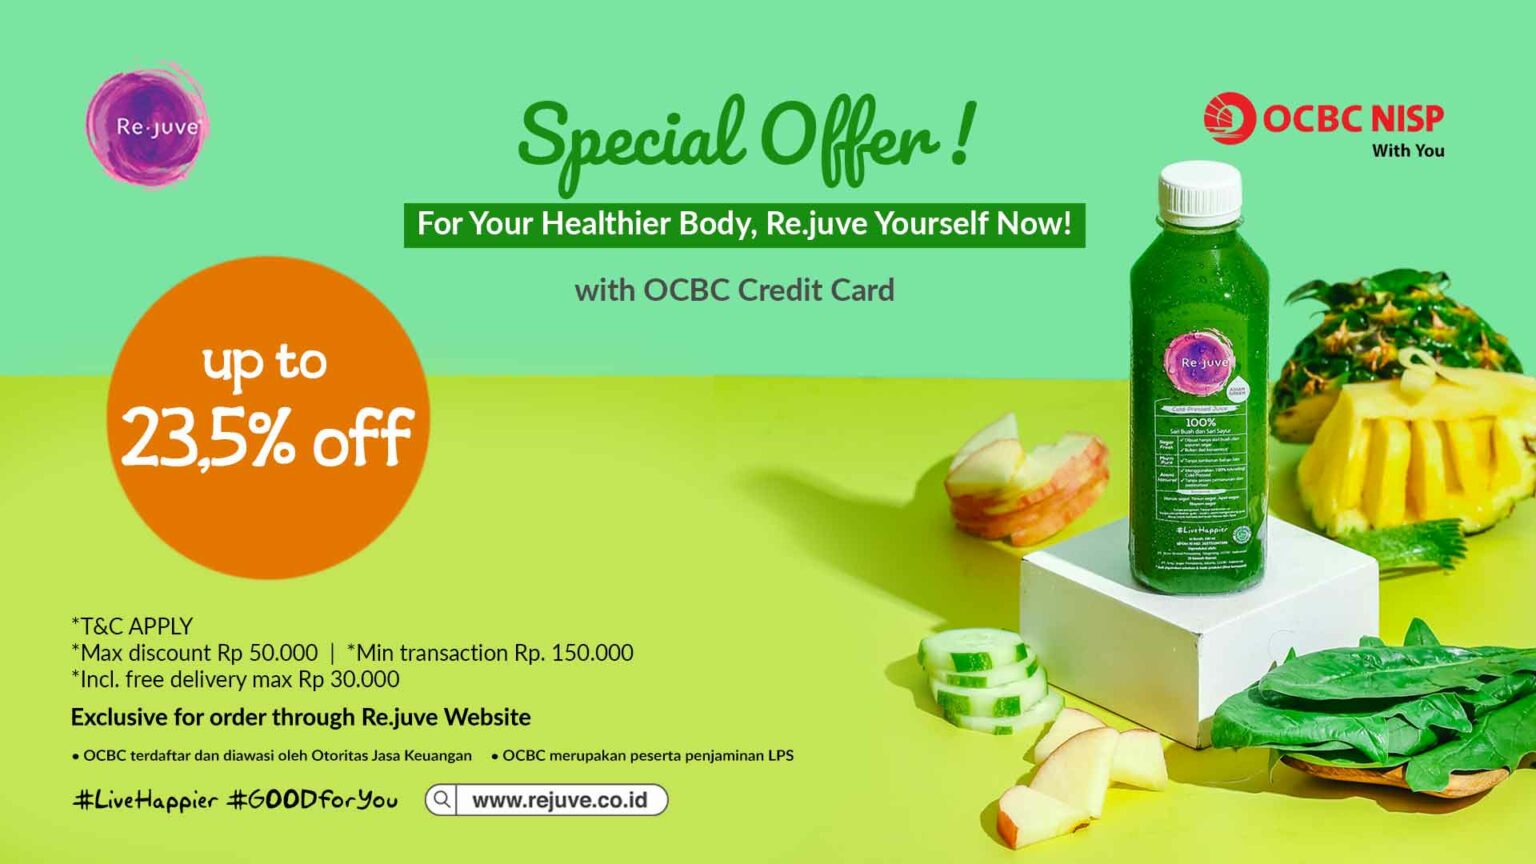 ocbc special offer 1536x864 1